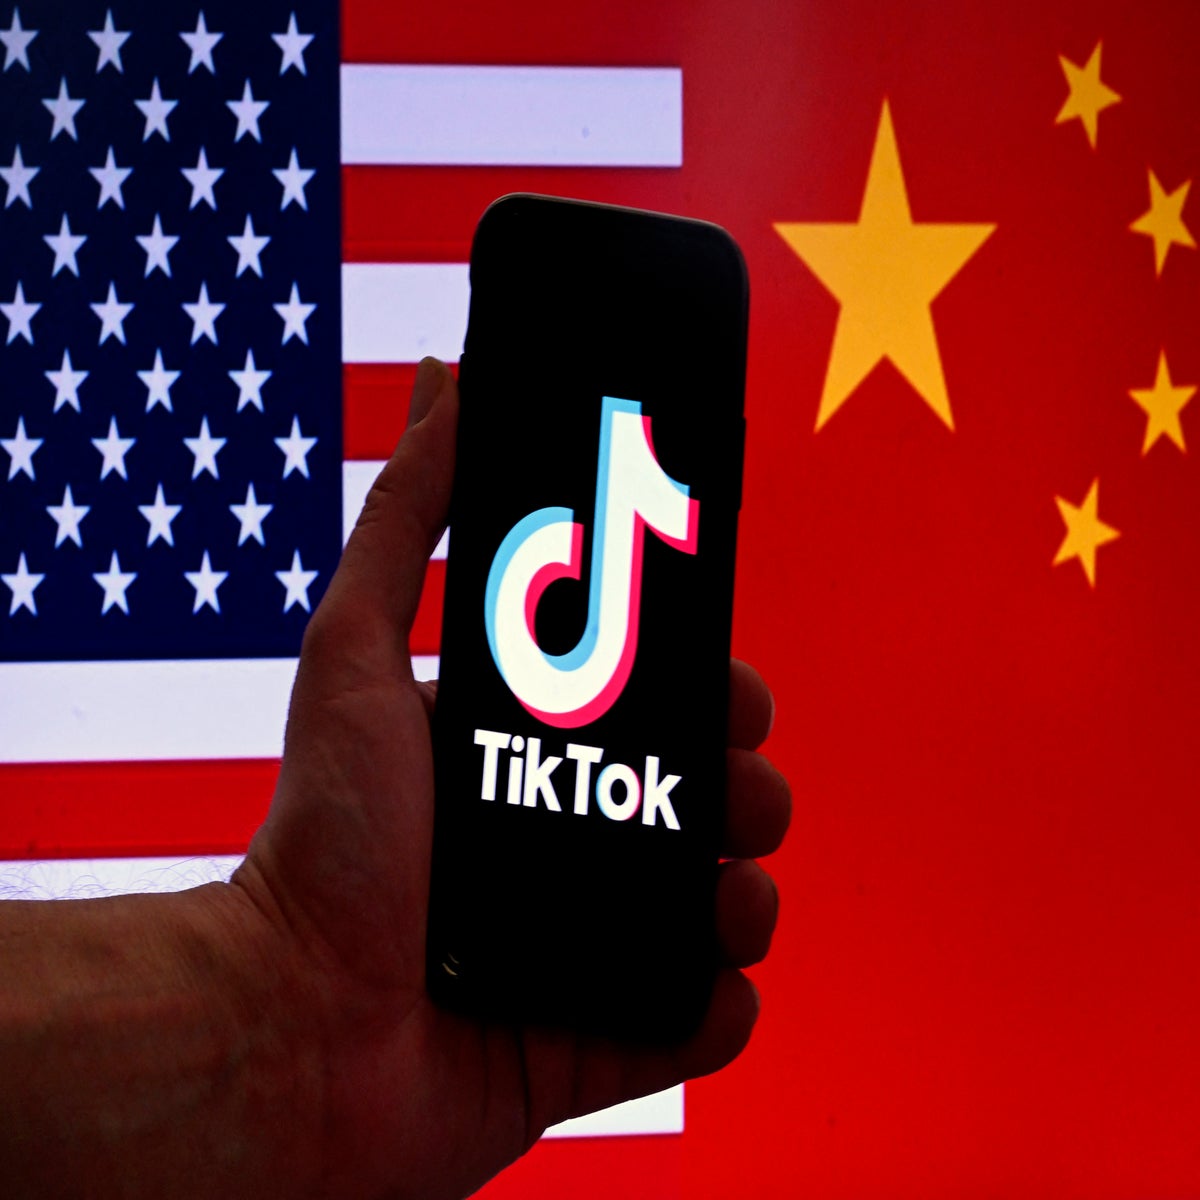 TikTok is urging users to call Congress about a looming ban - The